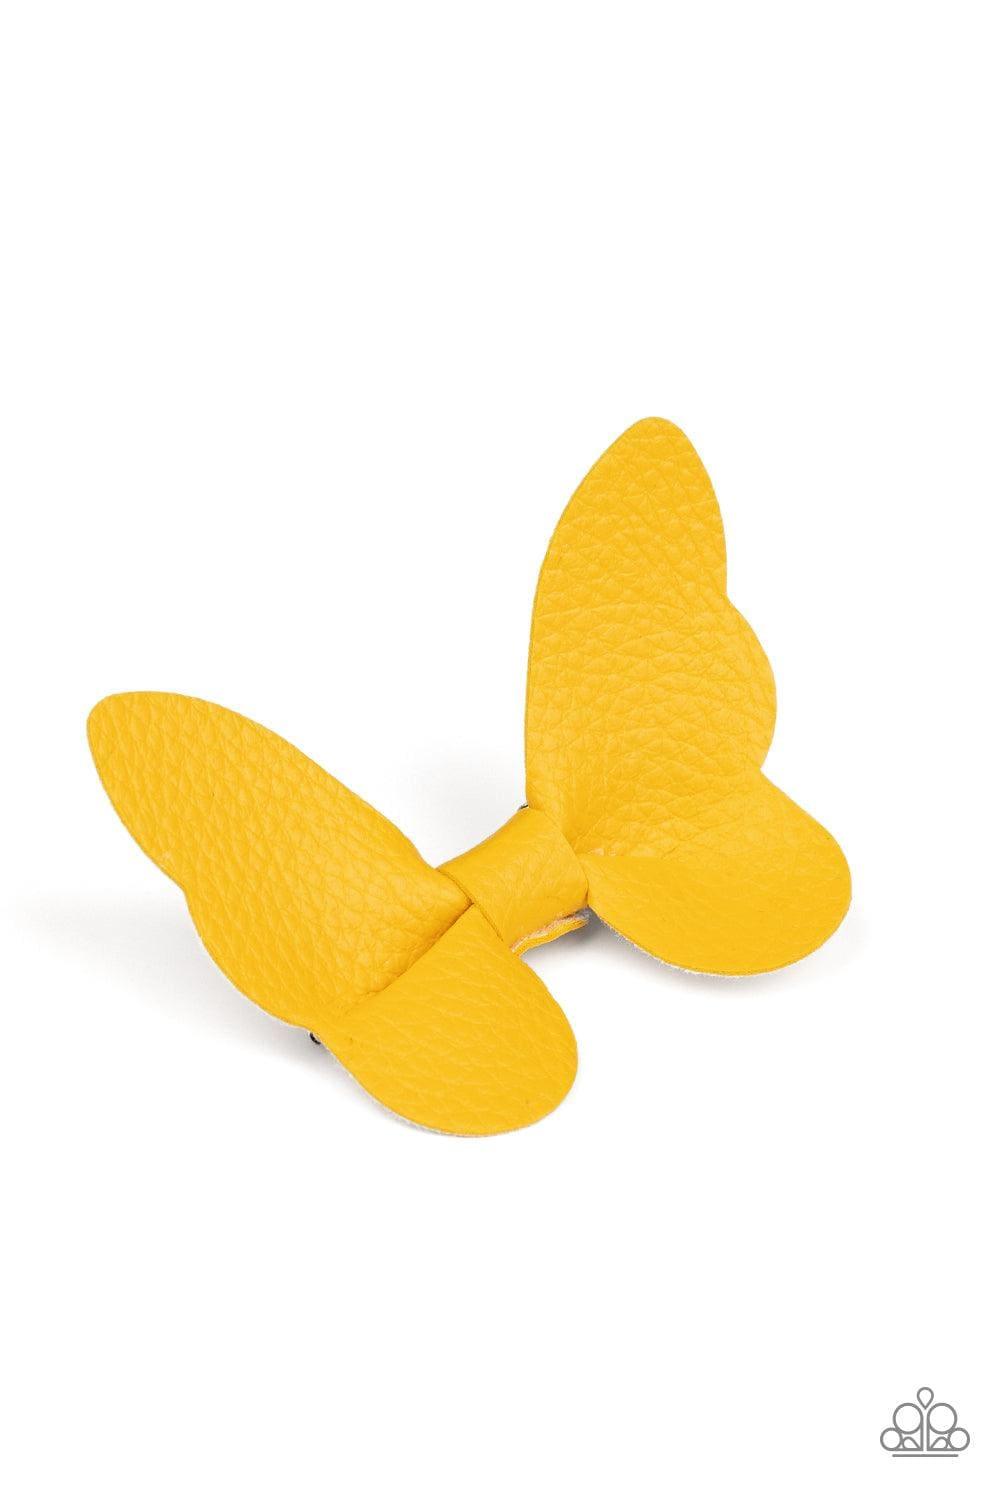 Paparazzi Accessories - Butterfly Oasis - Yellow Hair Clip - Bling by JessieK